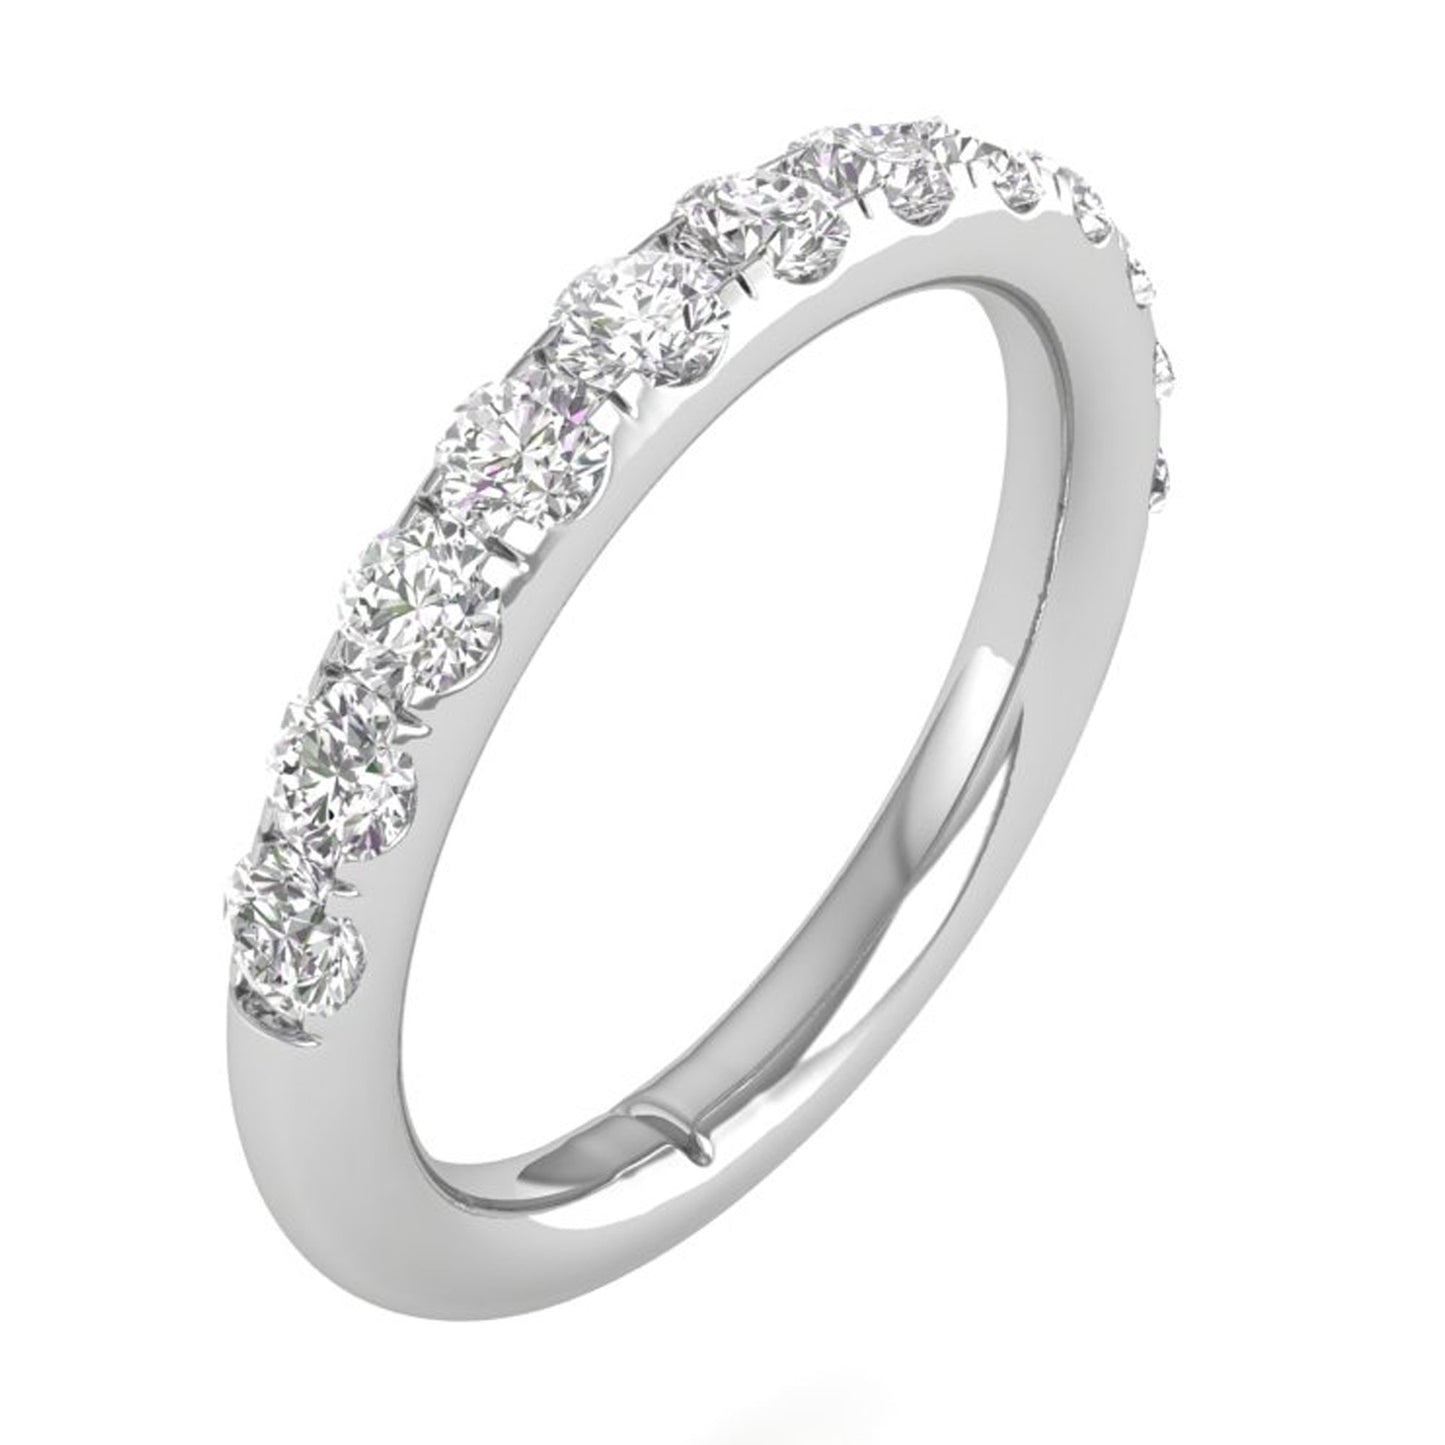 1 CTW COLORLESS FLAWLESS FRENCH PAVÉ WEDDING BAND